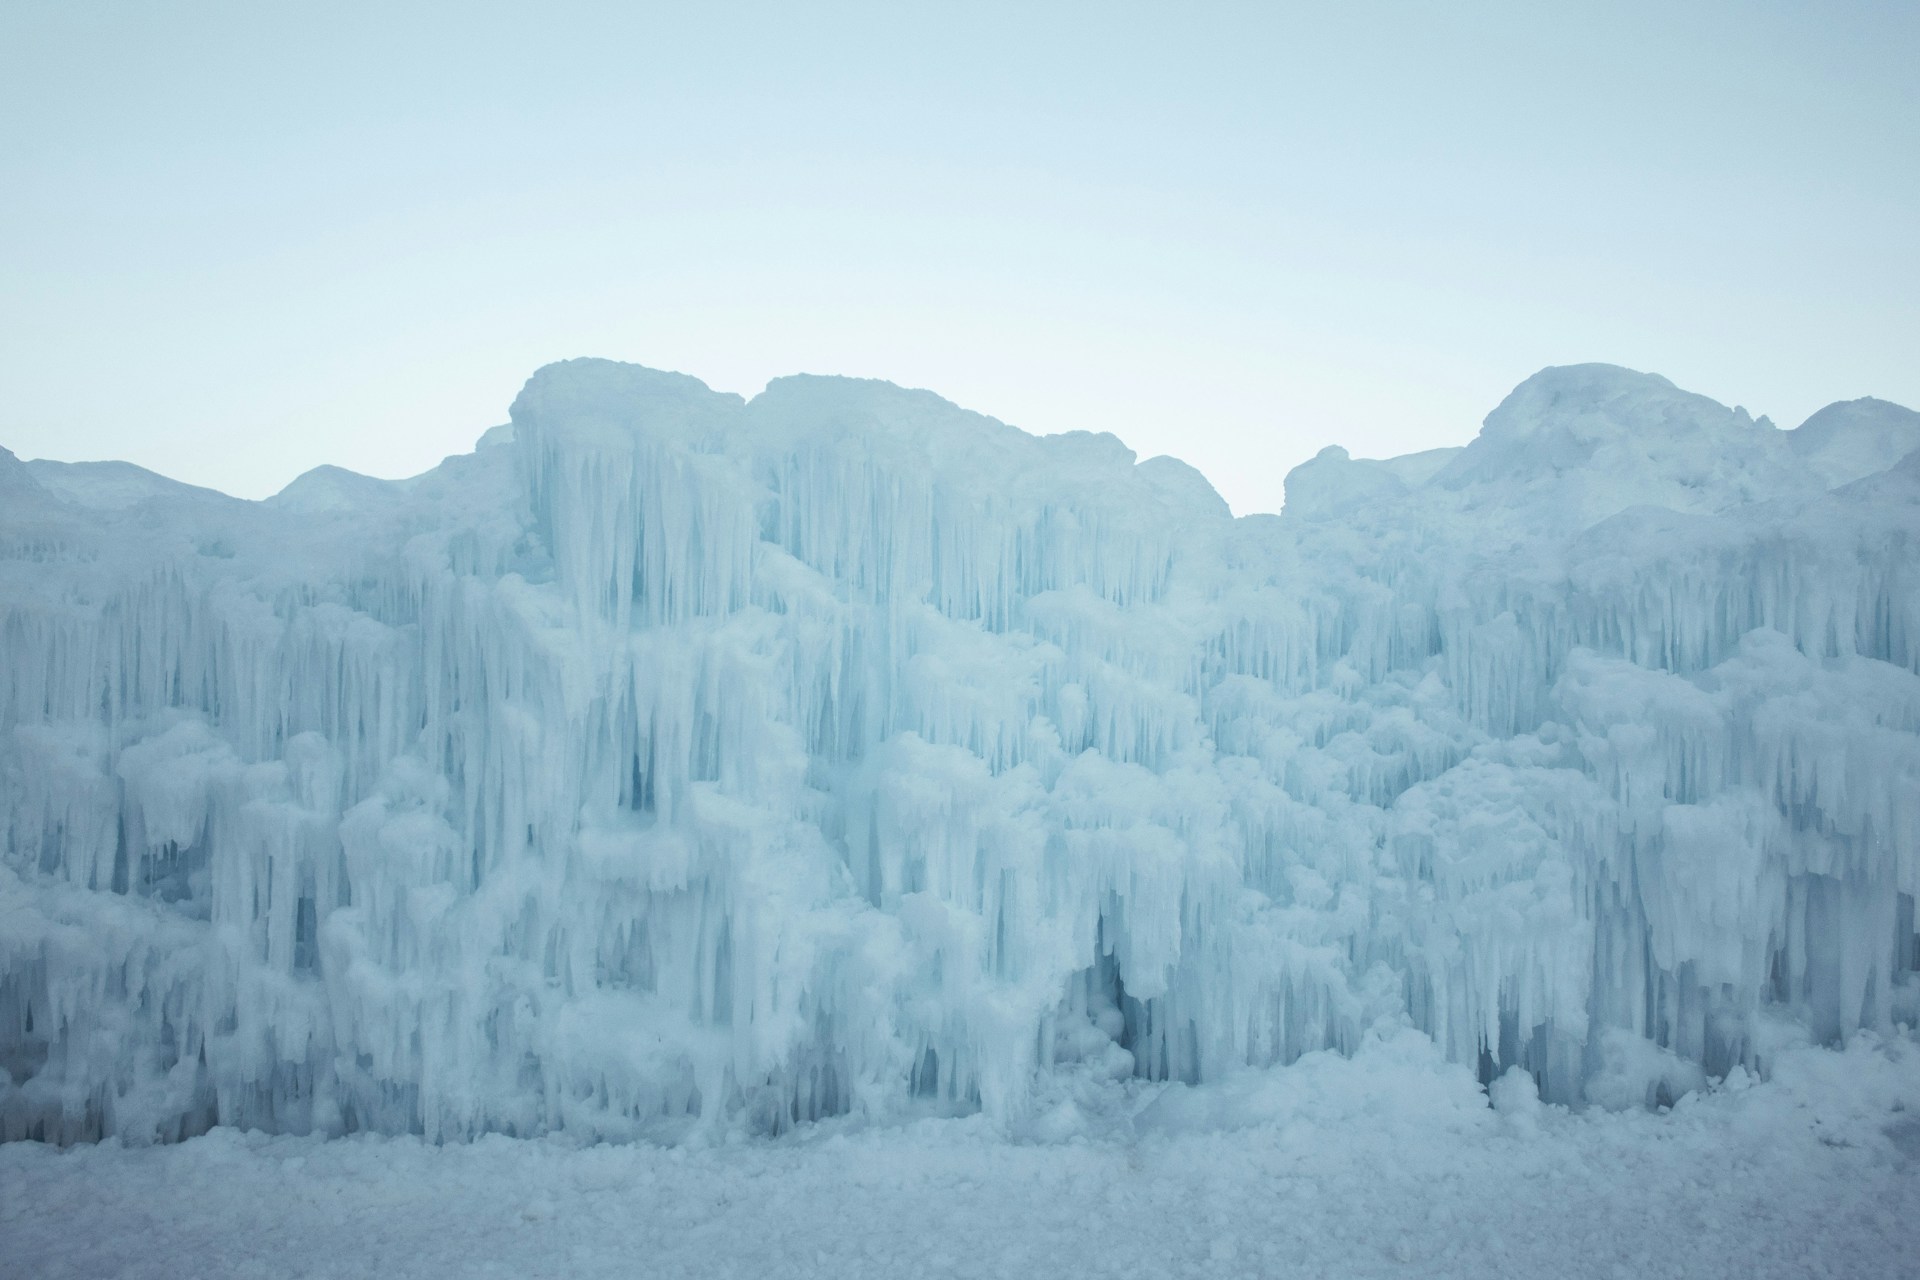 Wall of an ice castle, one of the best winter activities in Utah